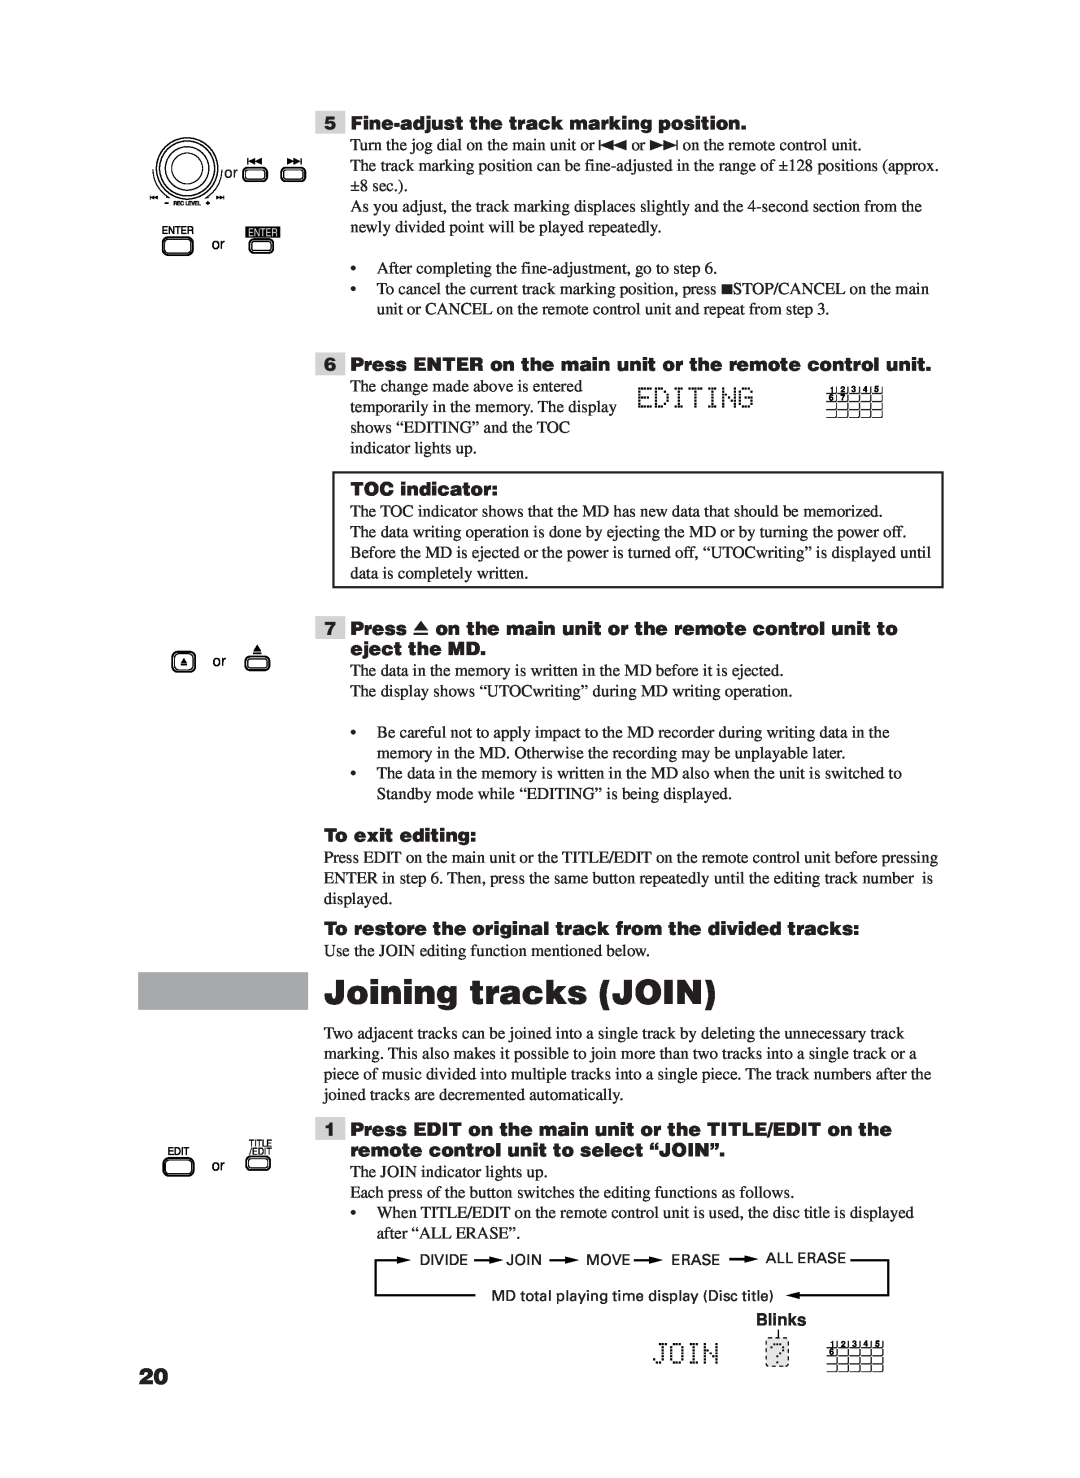 JVC XM-228BK manual Joining tracks JOIN, 5Fine-adjustthe track marking position, TOC indicator, To exit editing 